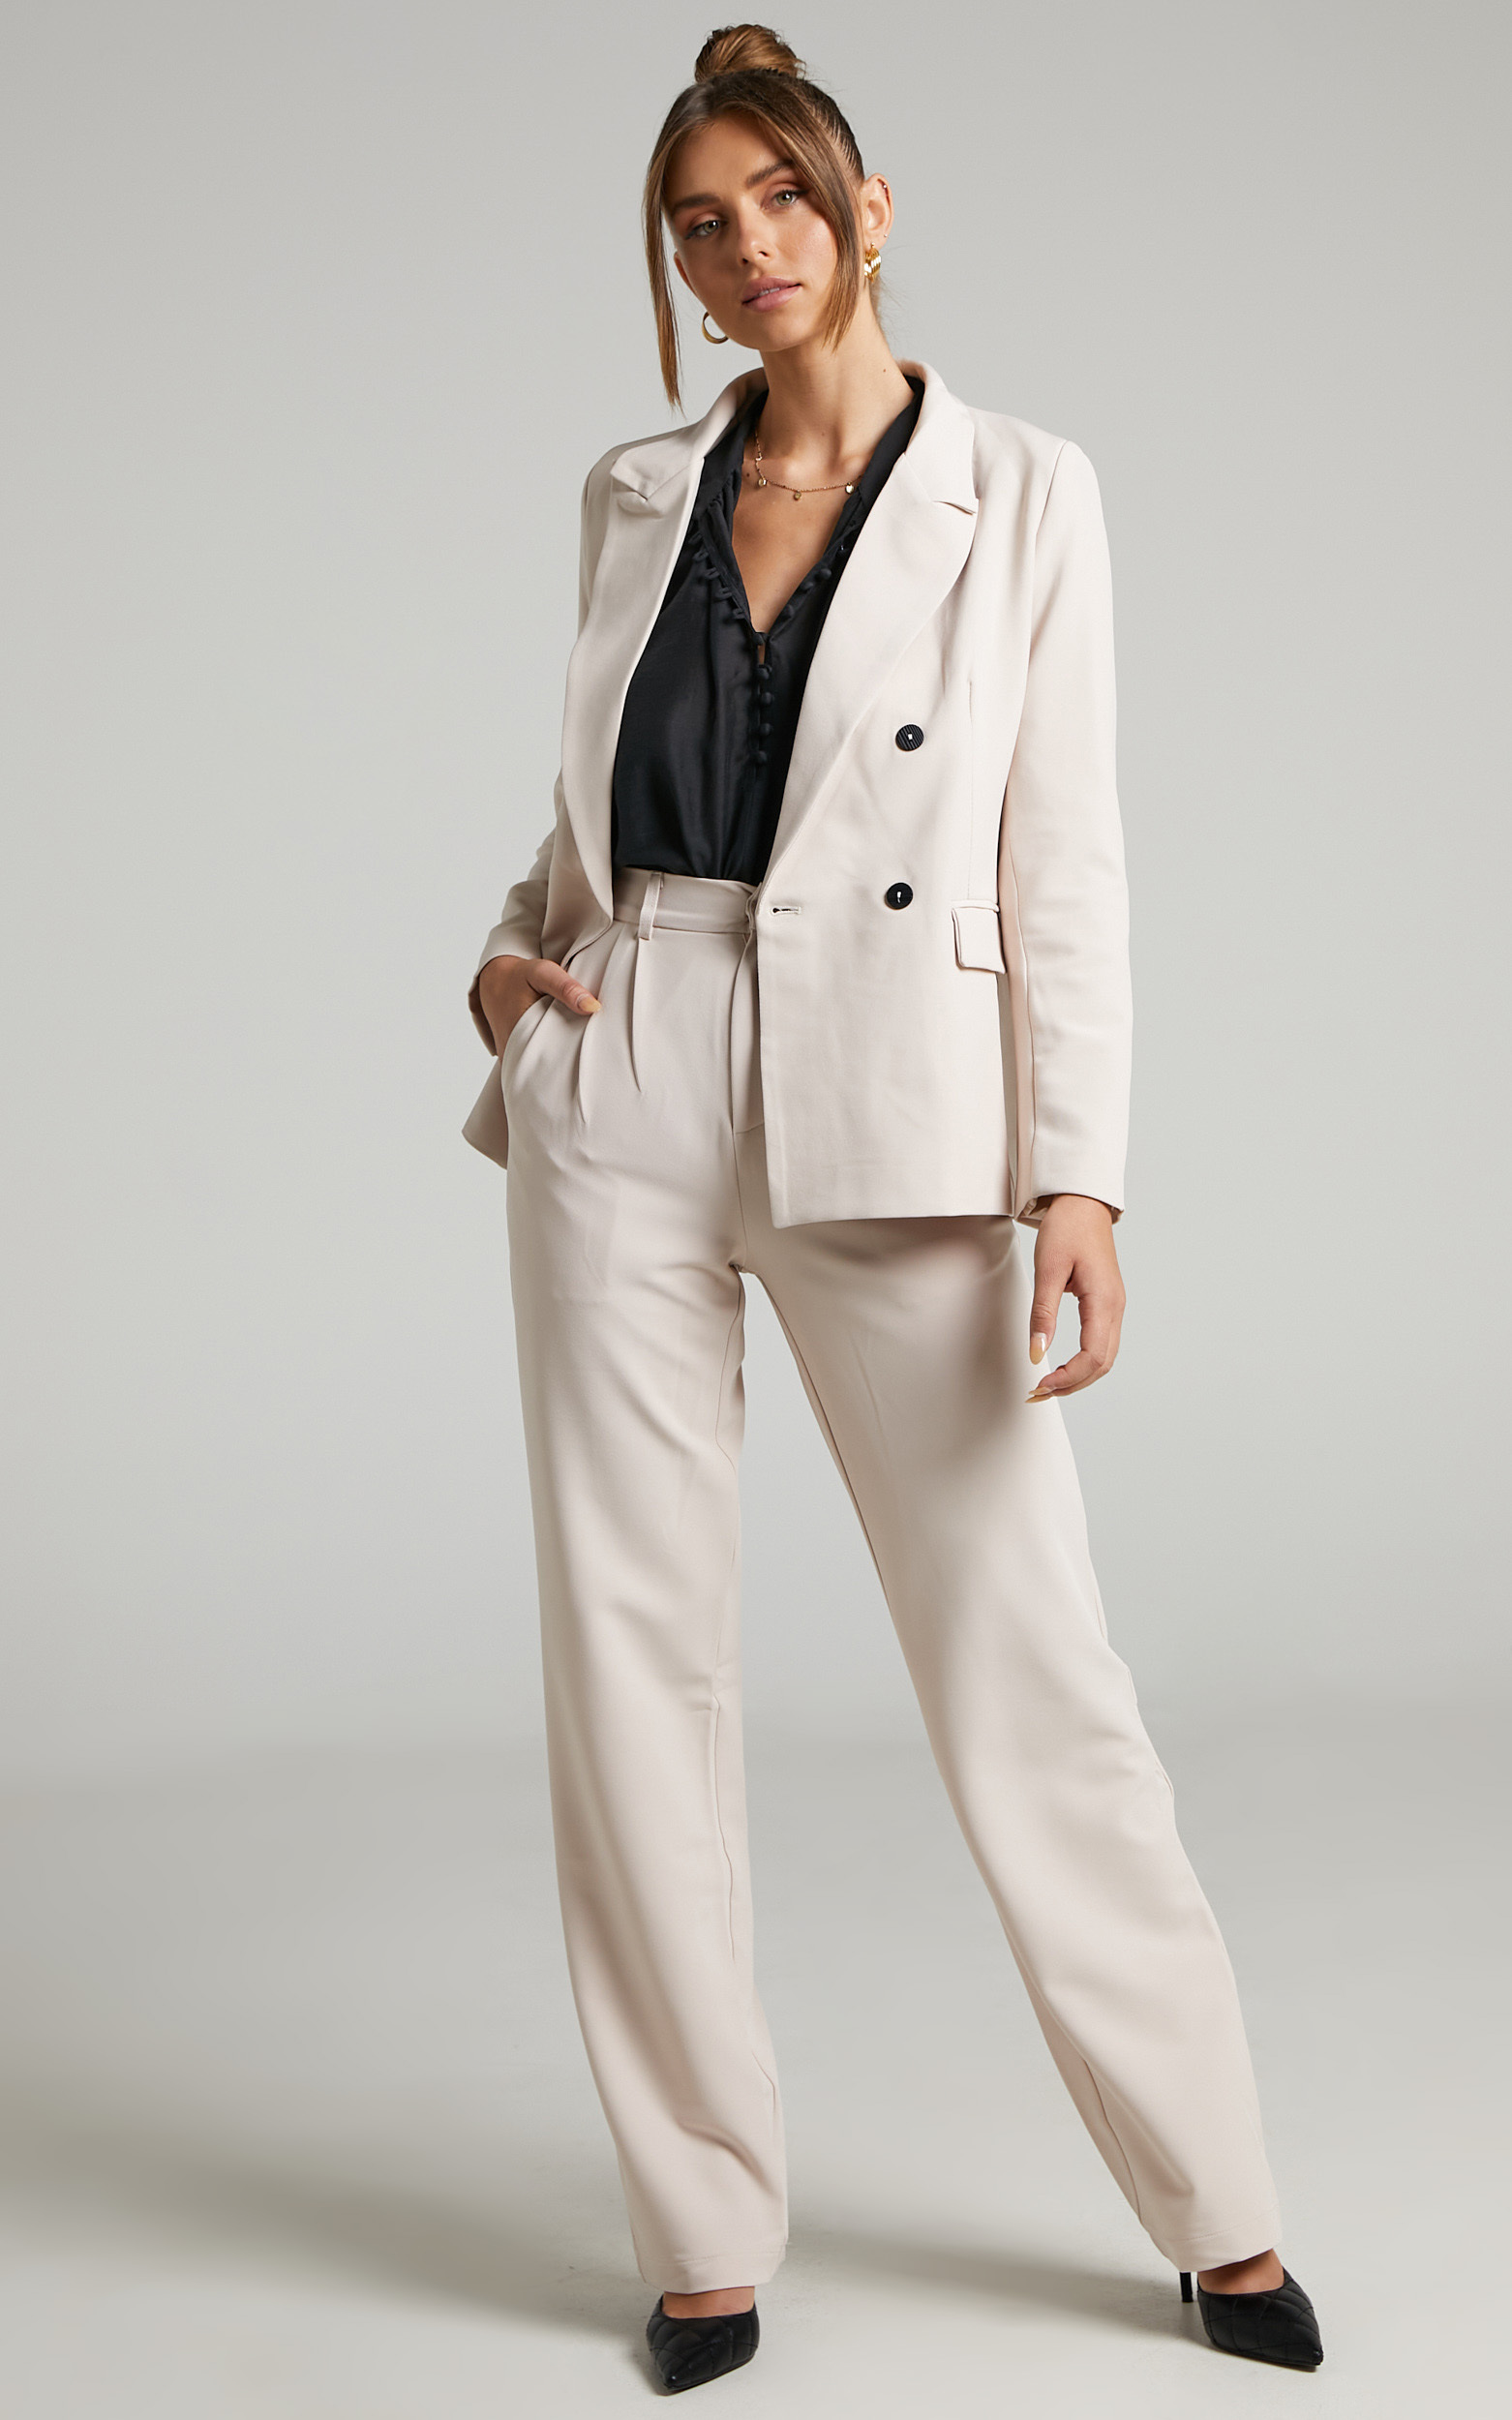 Davena High Waisted Tailored Pants in Sand - 06, BRN1, hi-res image number null